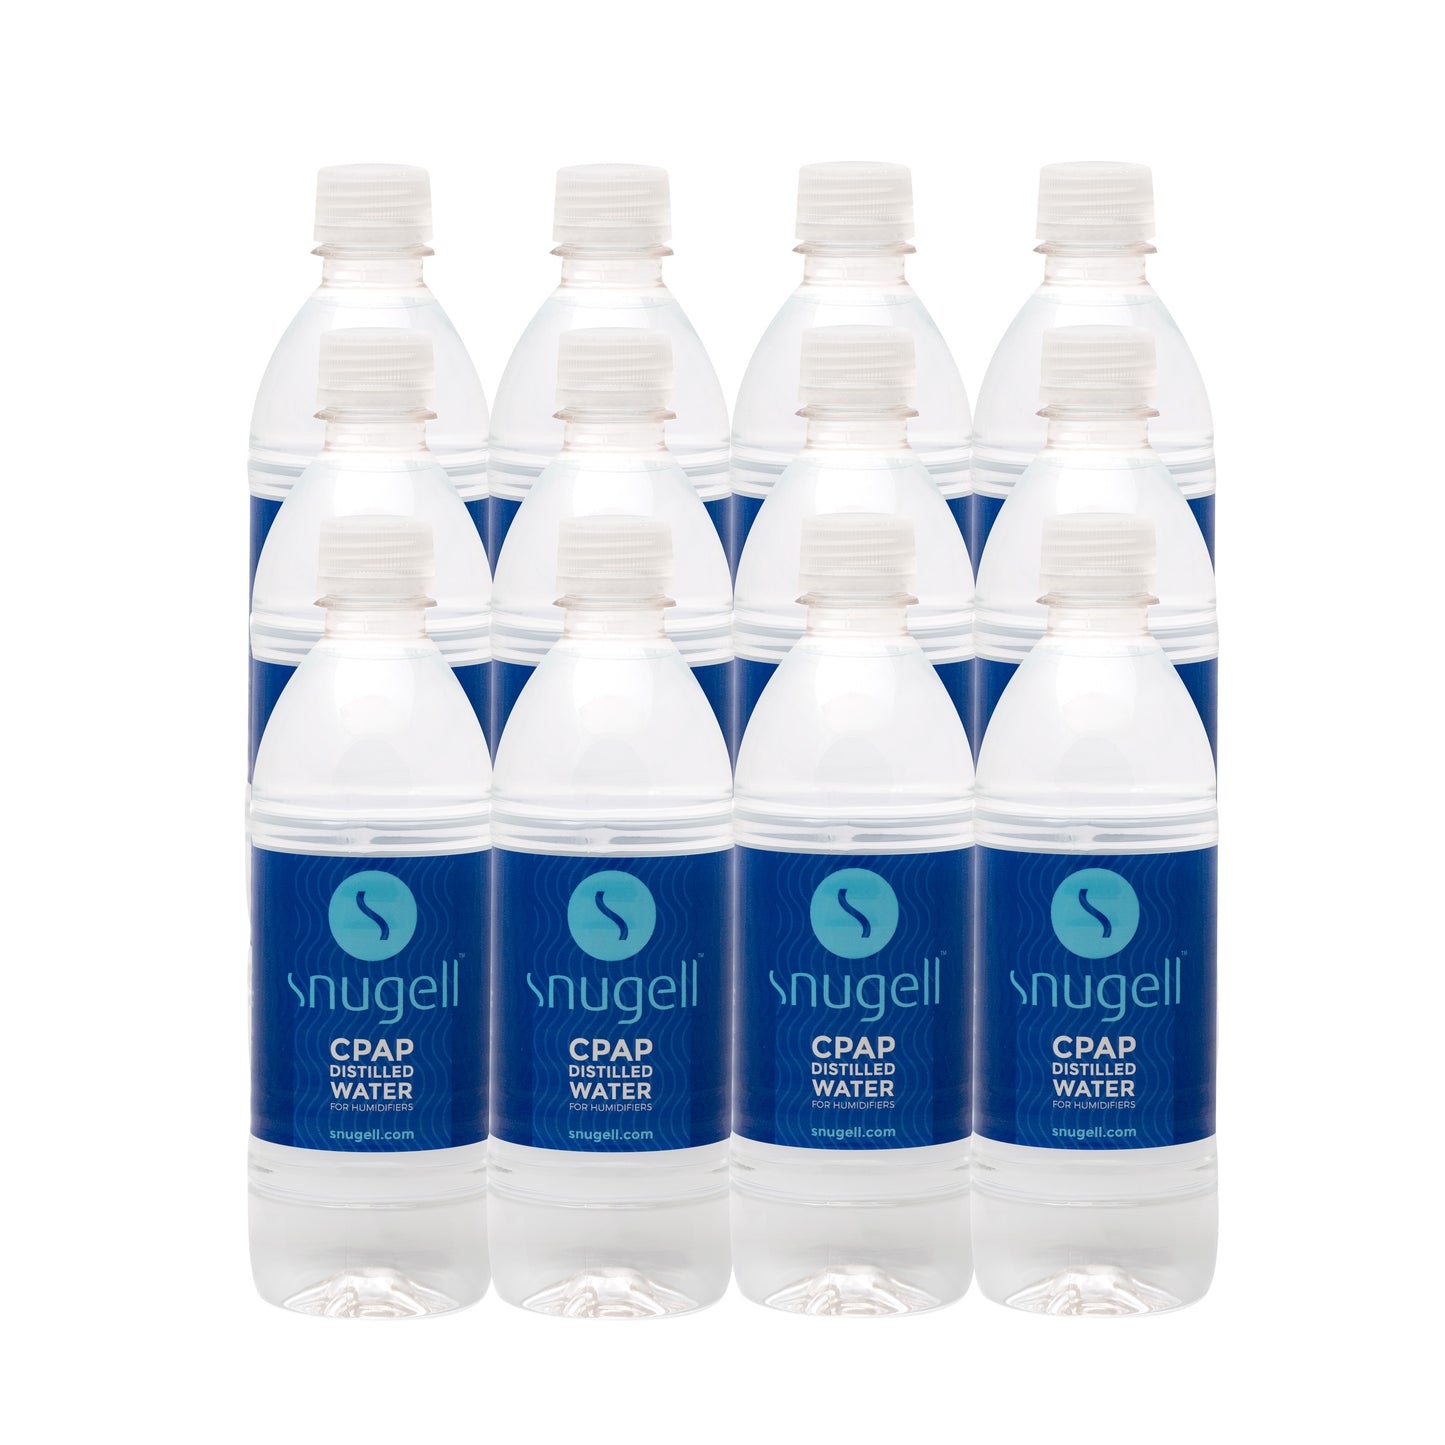 12 pack of distilled water.